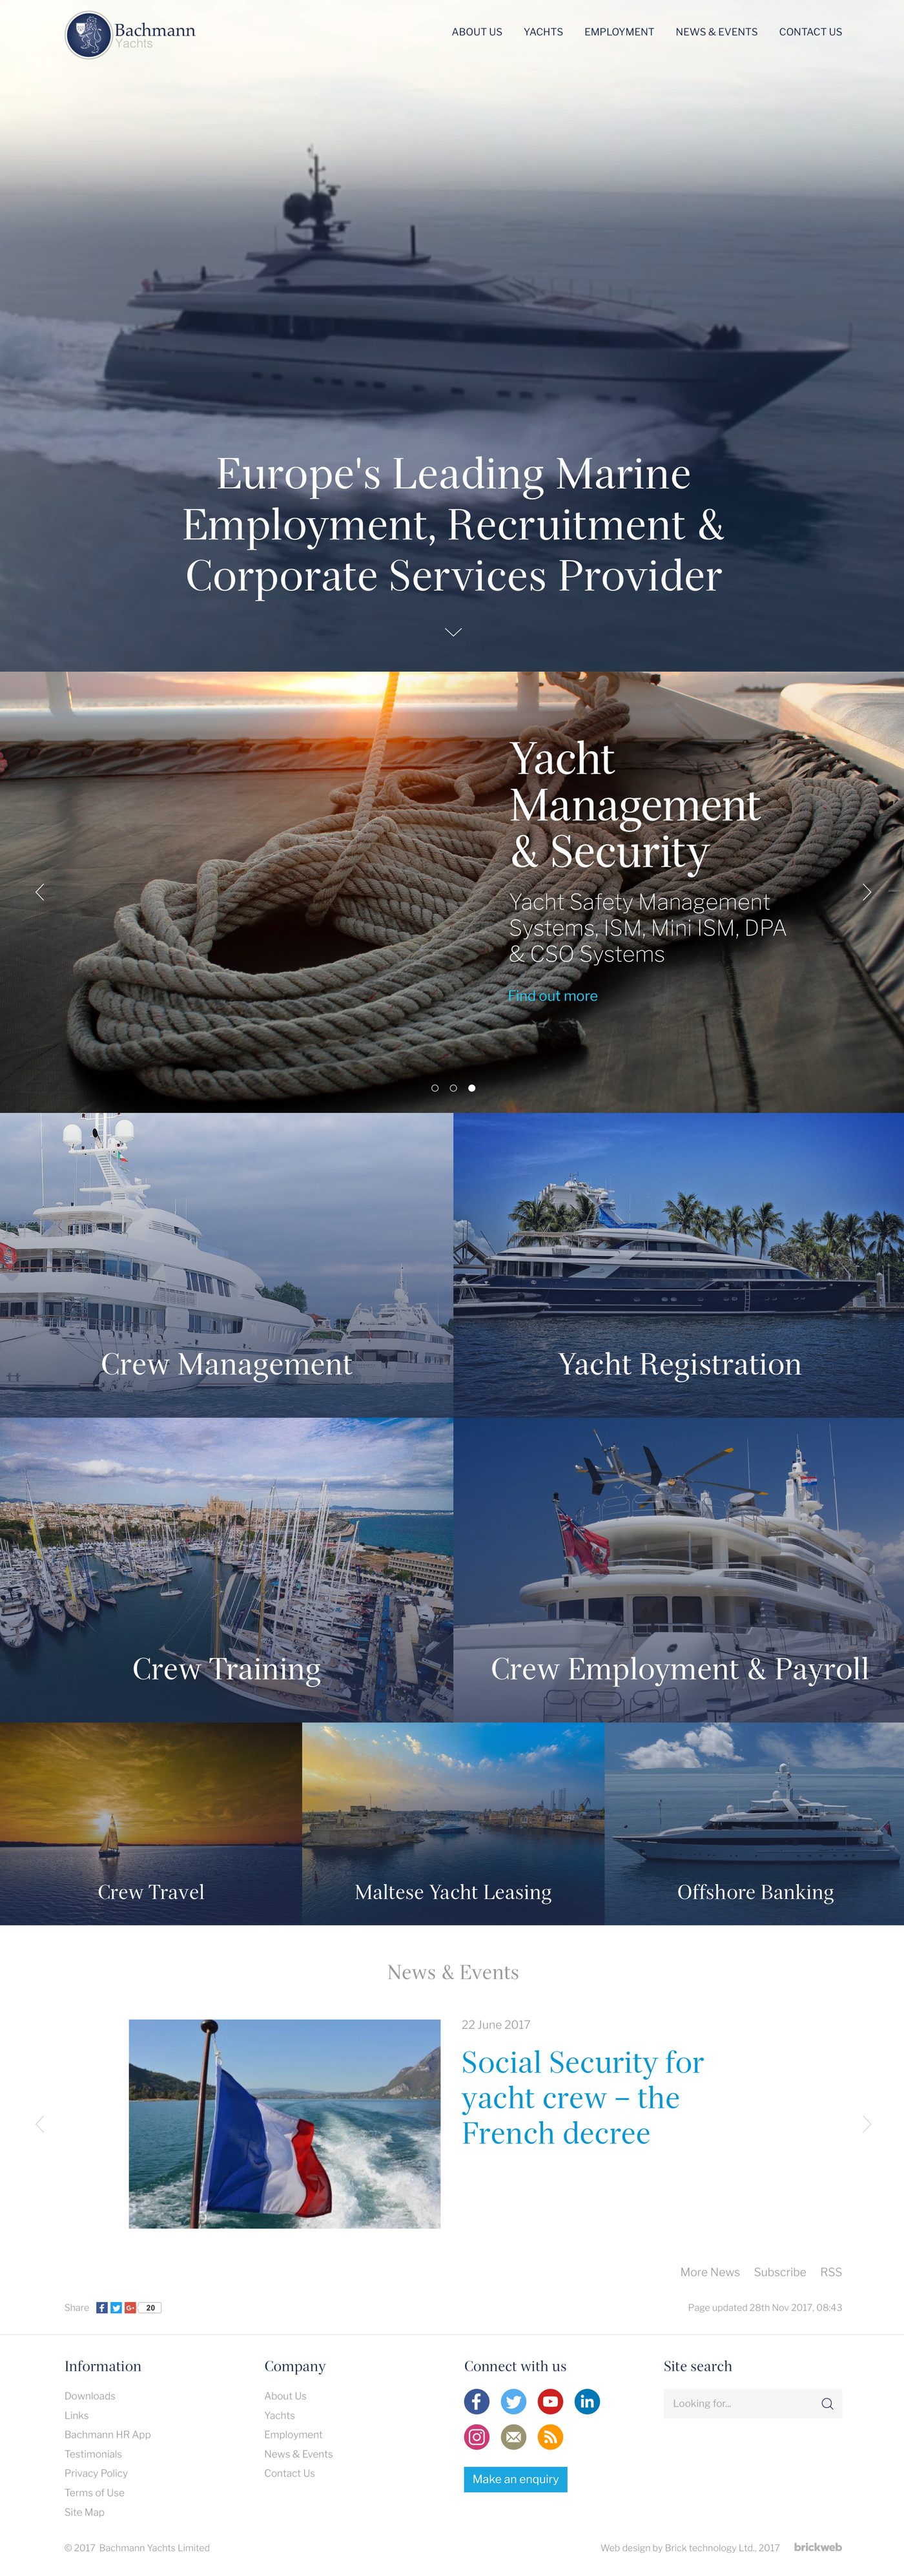 Bachmann Yachts Home page